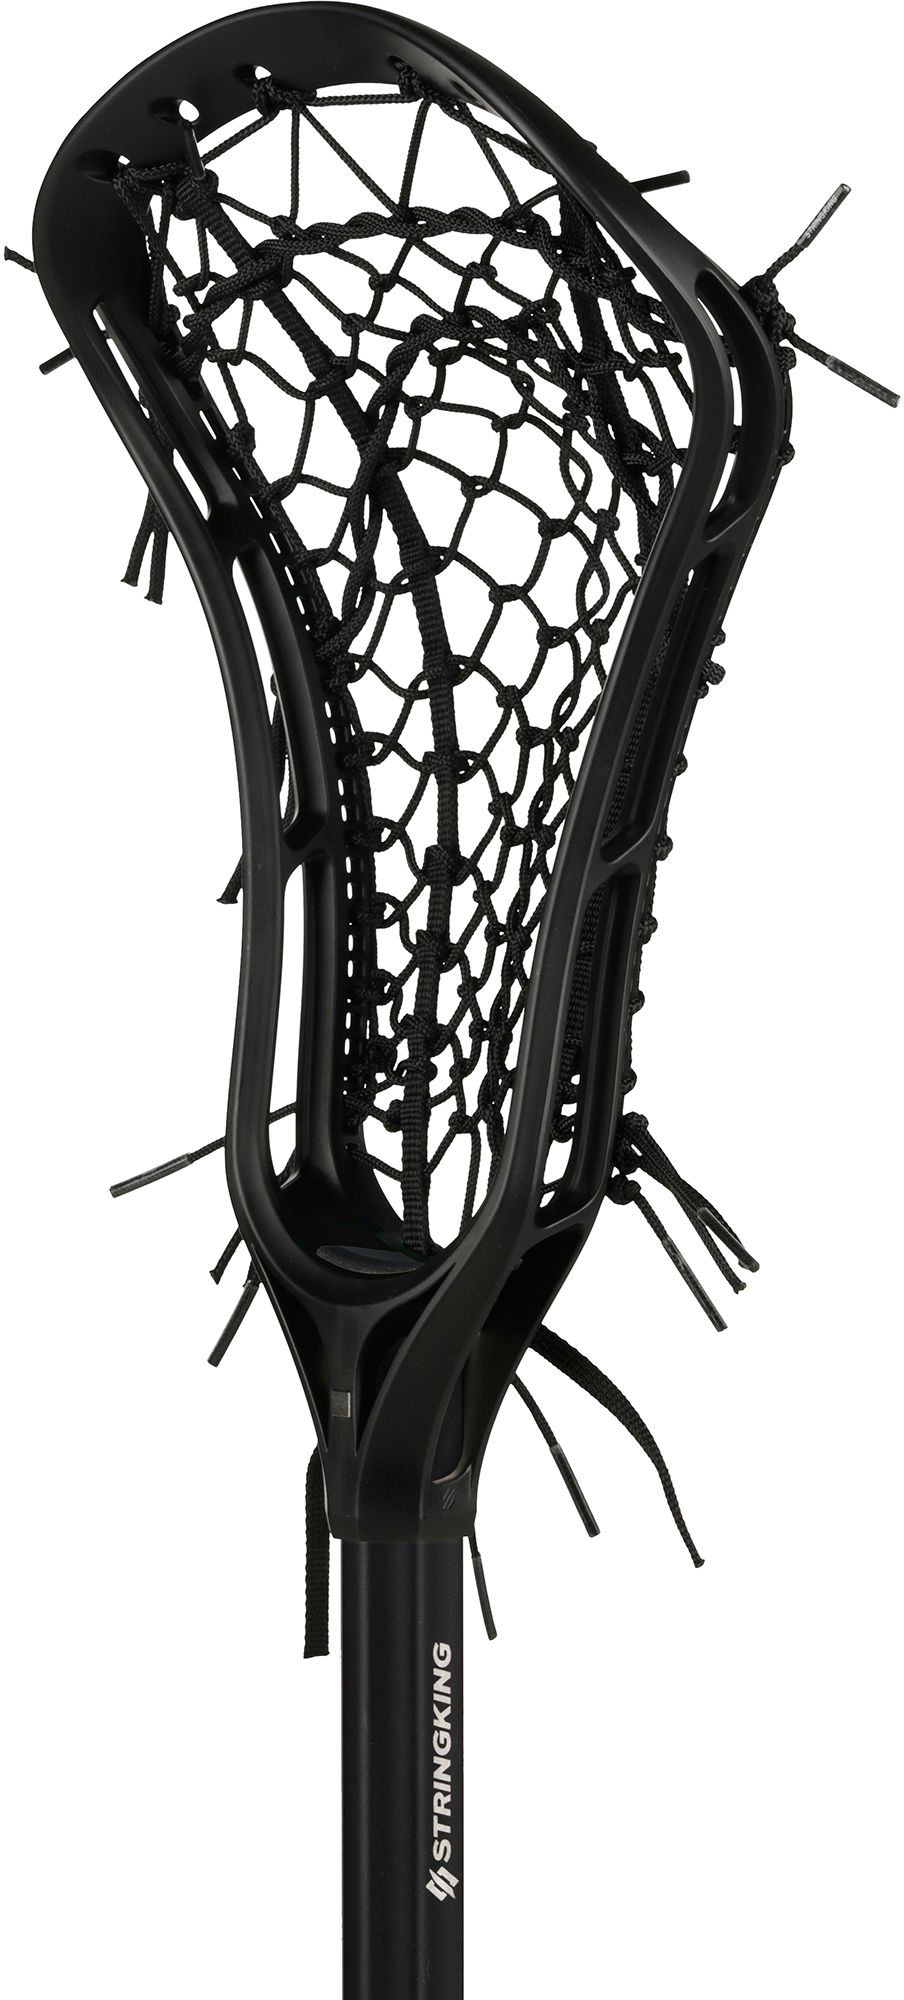 StringKing Women's Complete Lacrosse Stick Strung with Tech Trad Pocket